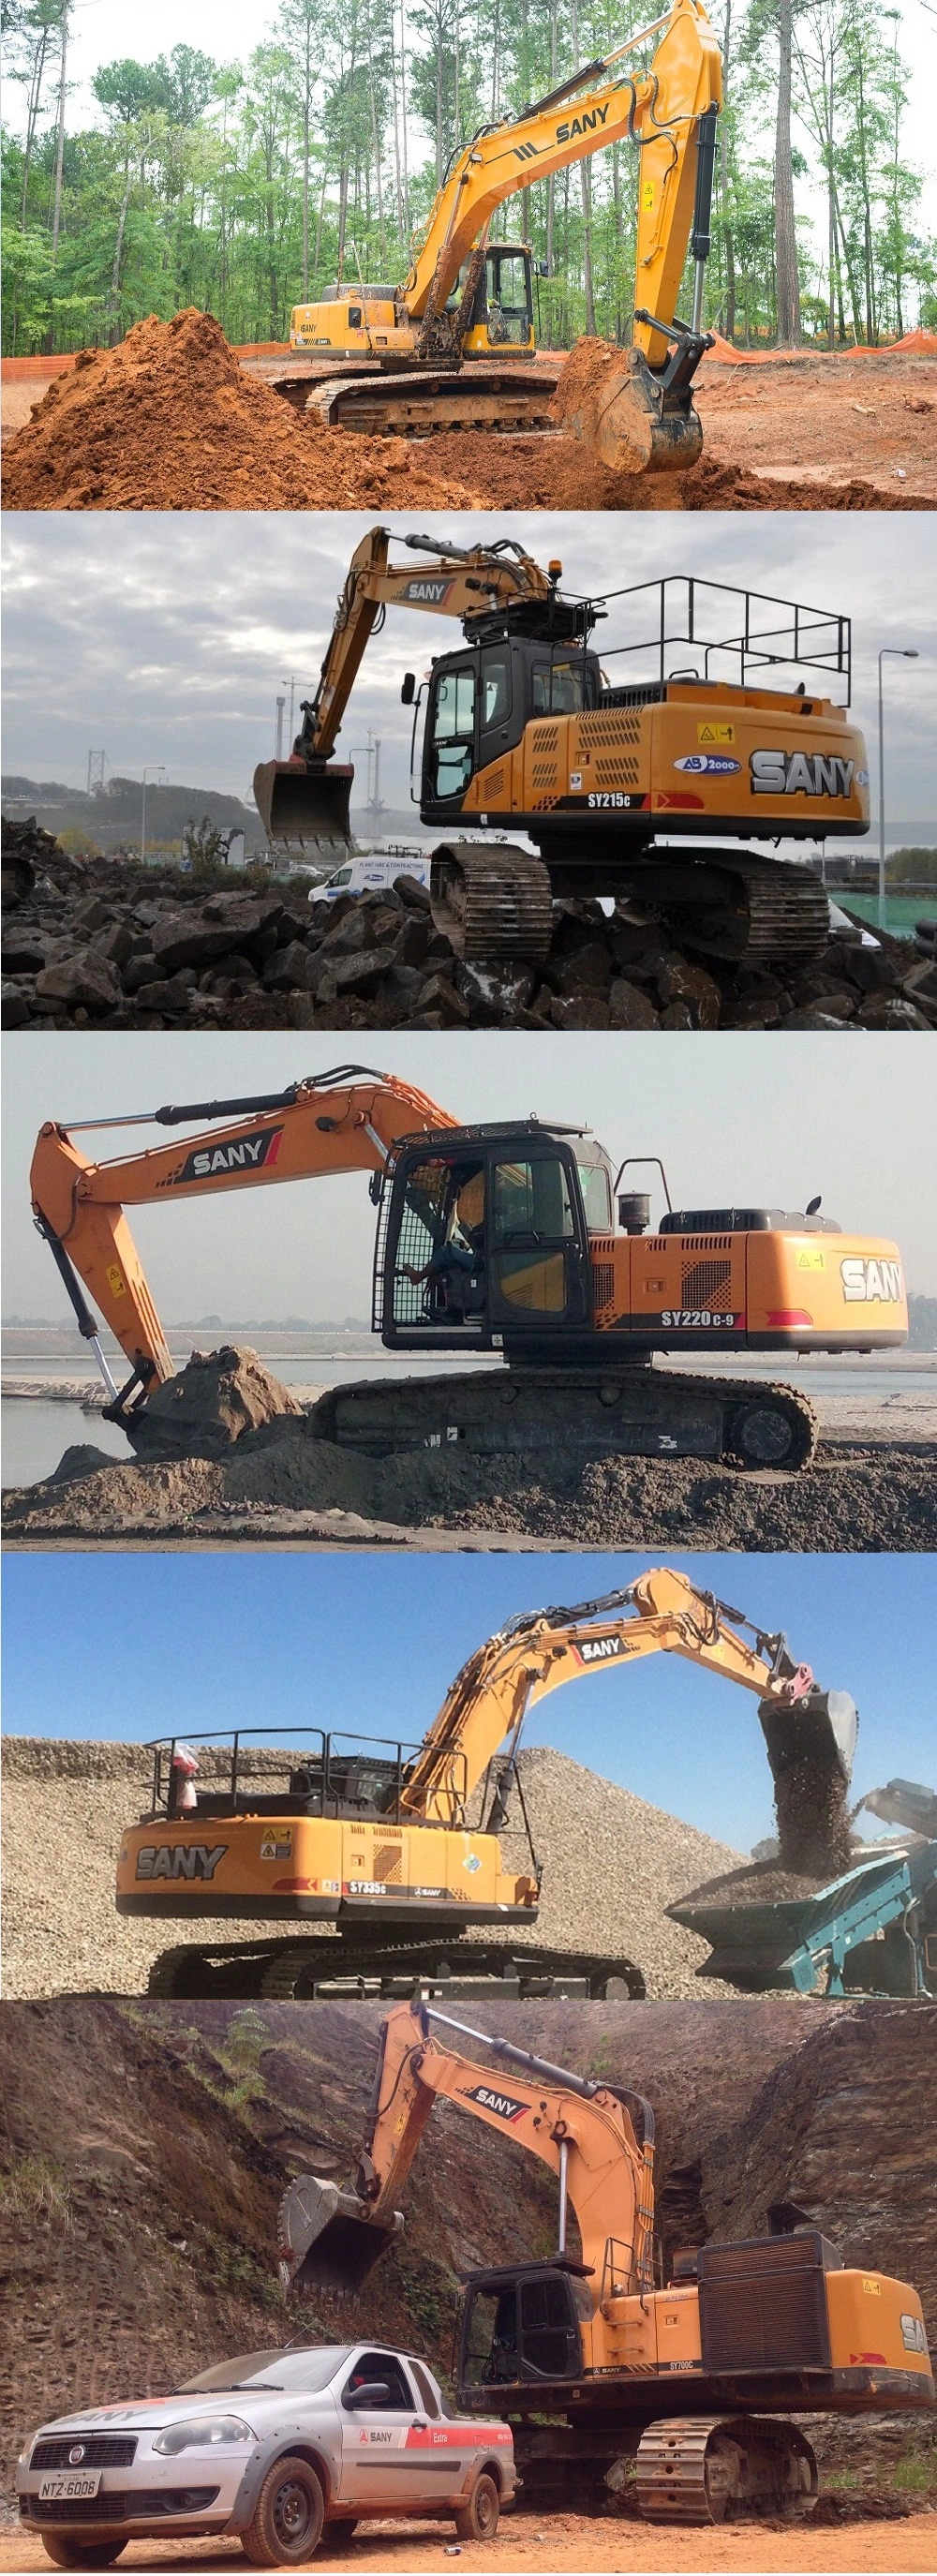 Mining Excavator Manufacturer Sany 50 Tons Sy500h Price in Indonesia